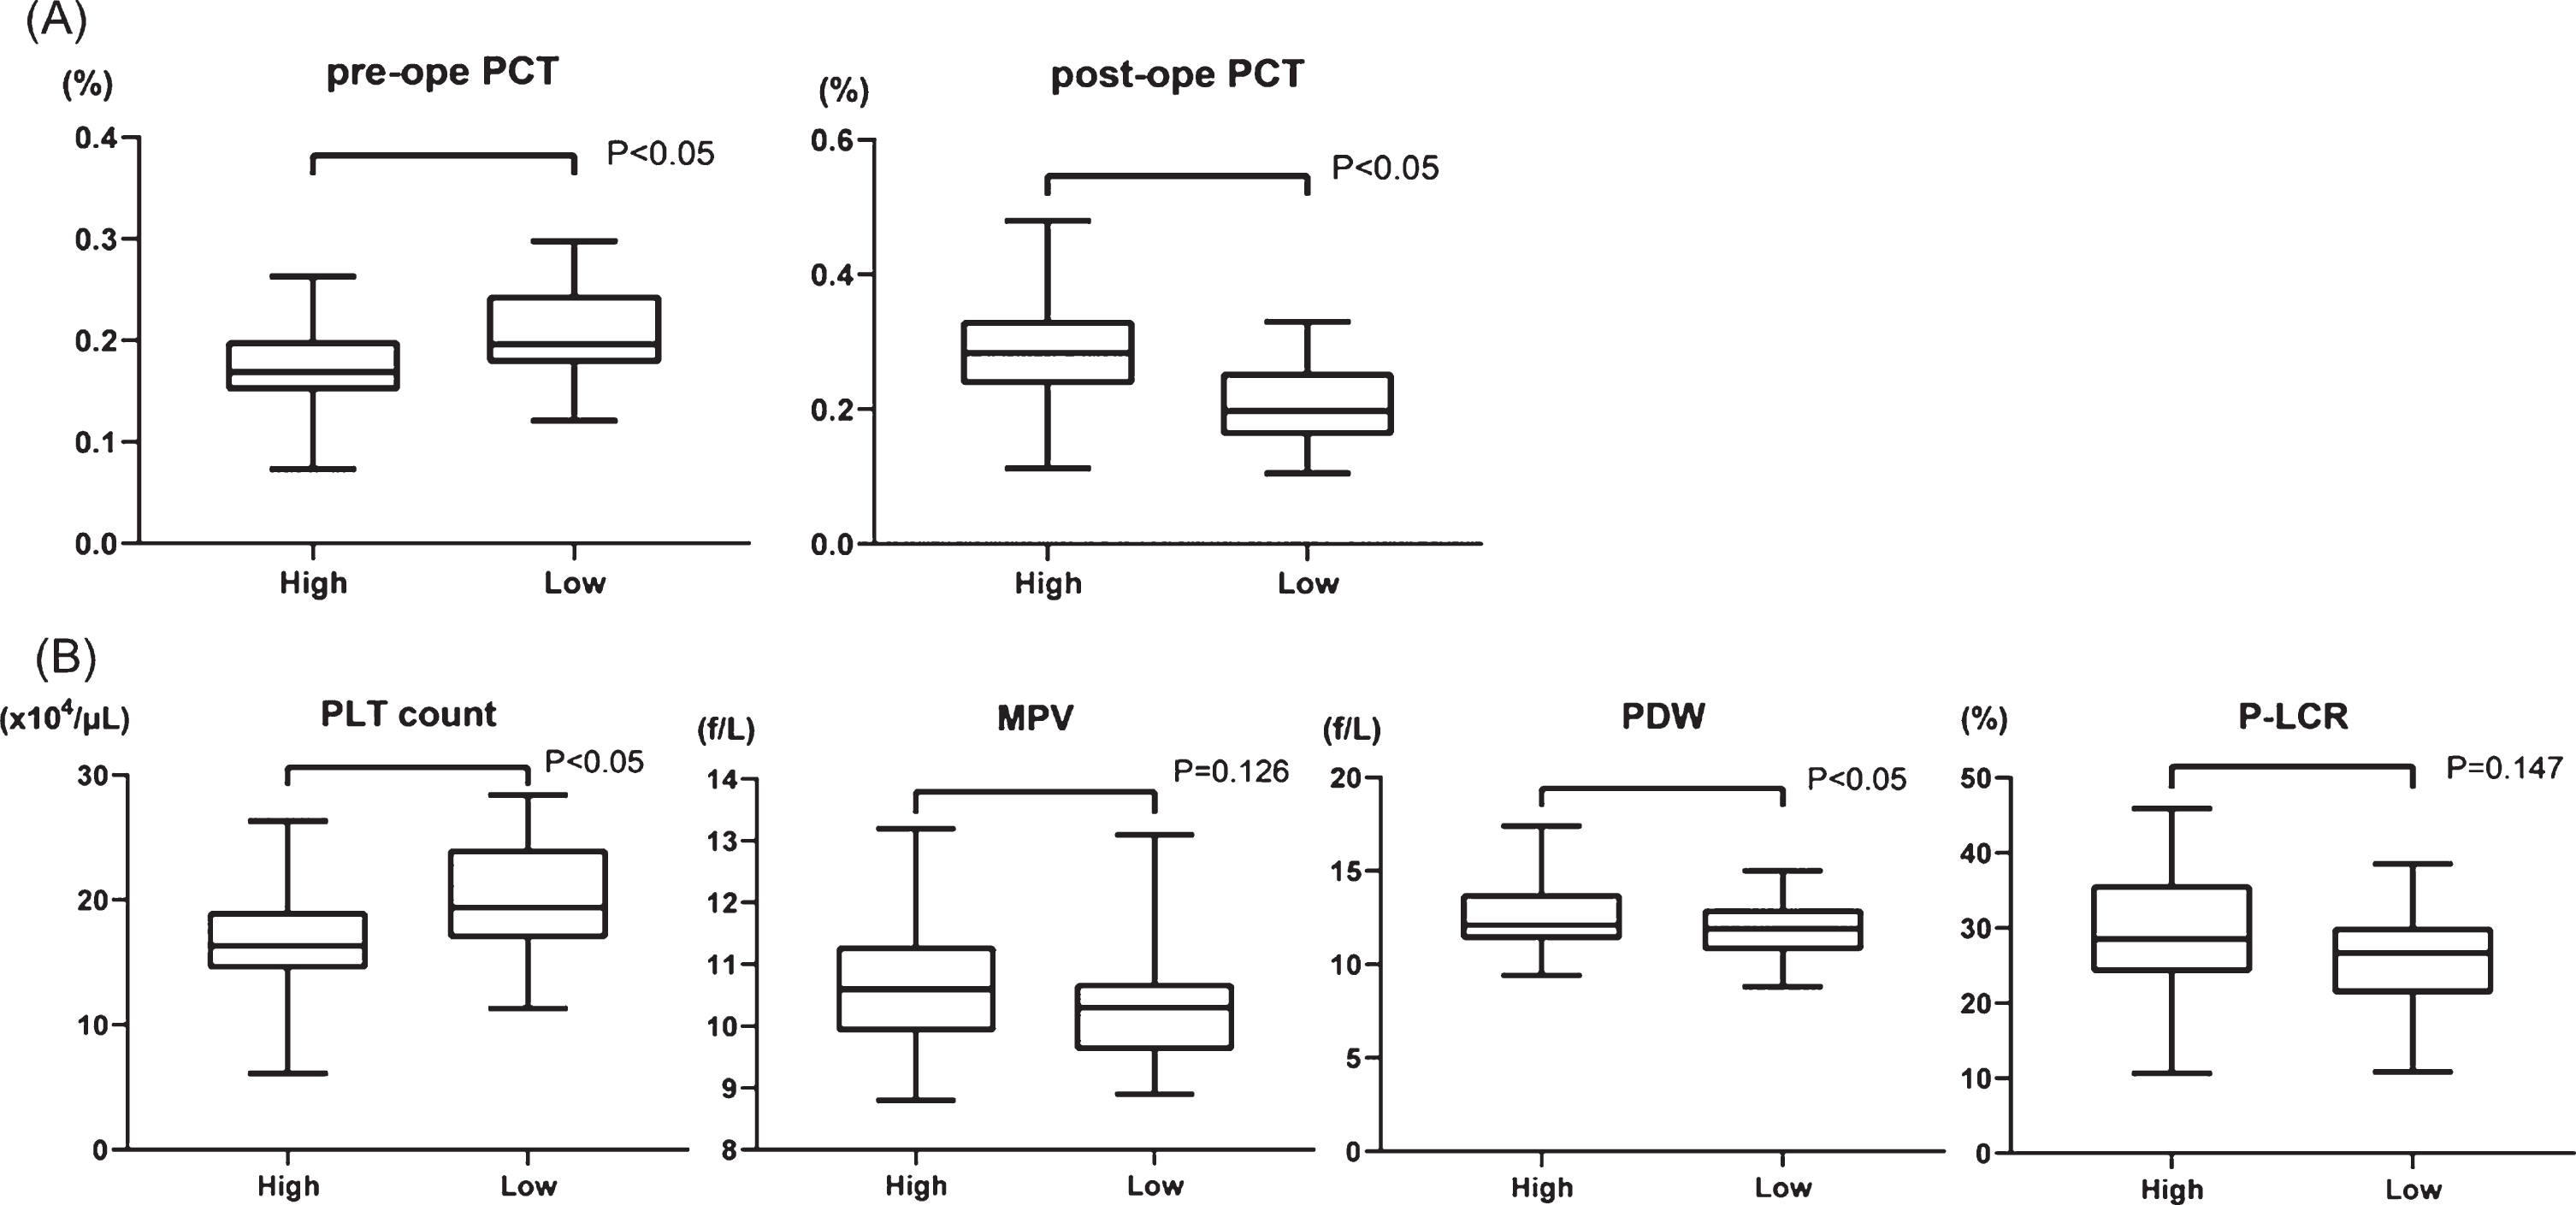 (A) Comparison of PCT (plateletcrit) values in two groups; high PCT increasing rate (high) vs low PCT increasing rate (low) before and after surgery. (B) Comparison of four platelet factors between high and low group before surgery. PLT: platelet, MPV: mean platelet volume, PDW: platelet distribution width, and P-LCR: platelet large cell ratio.